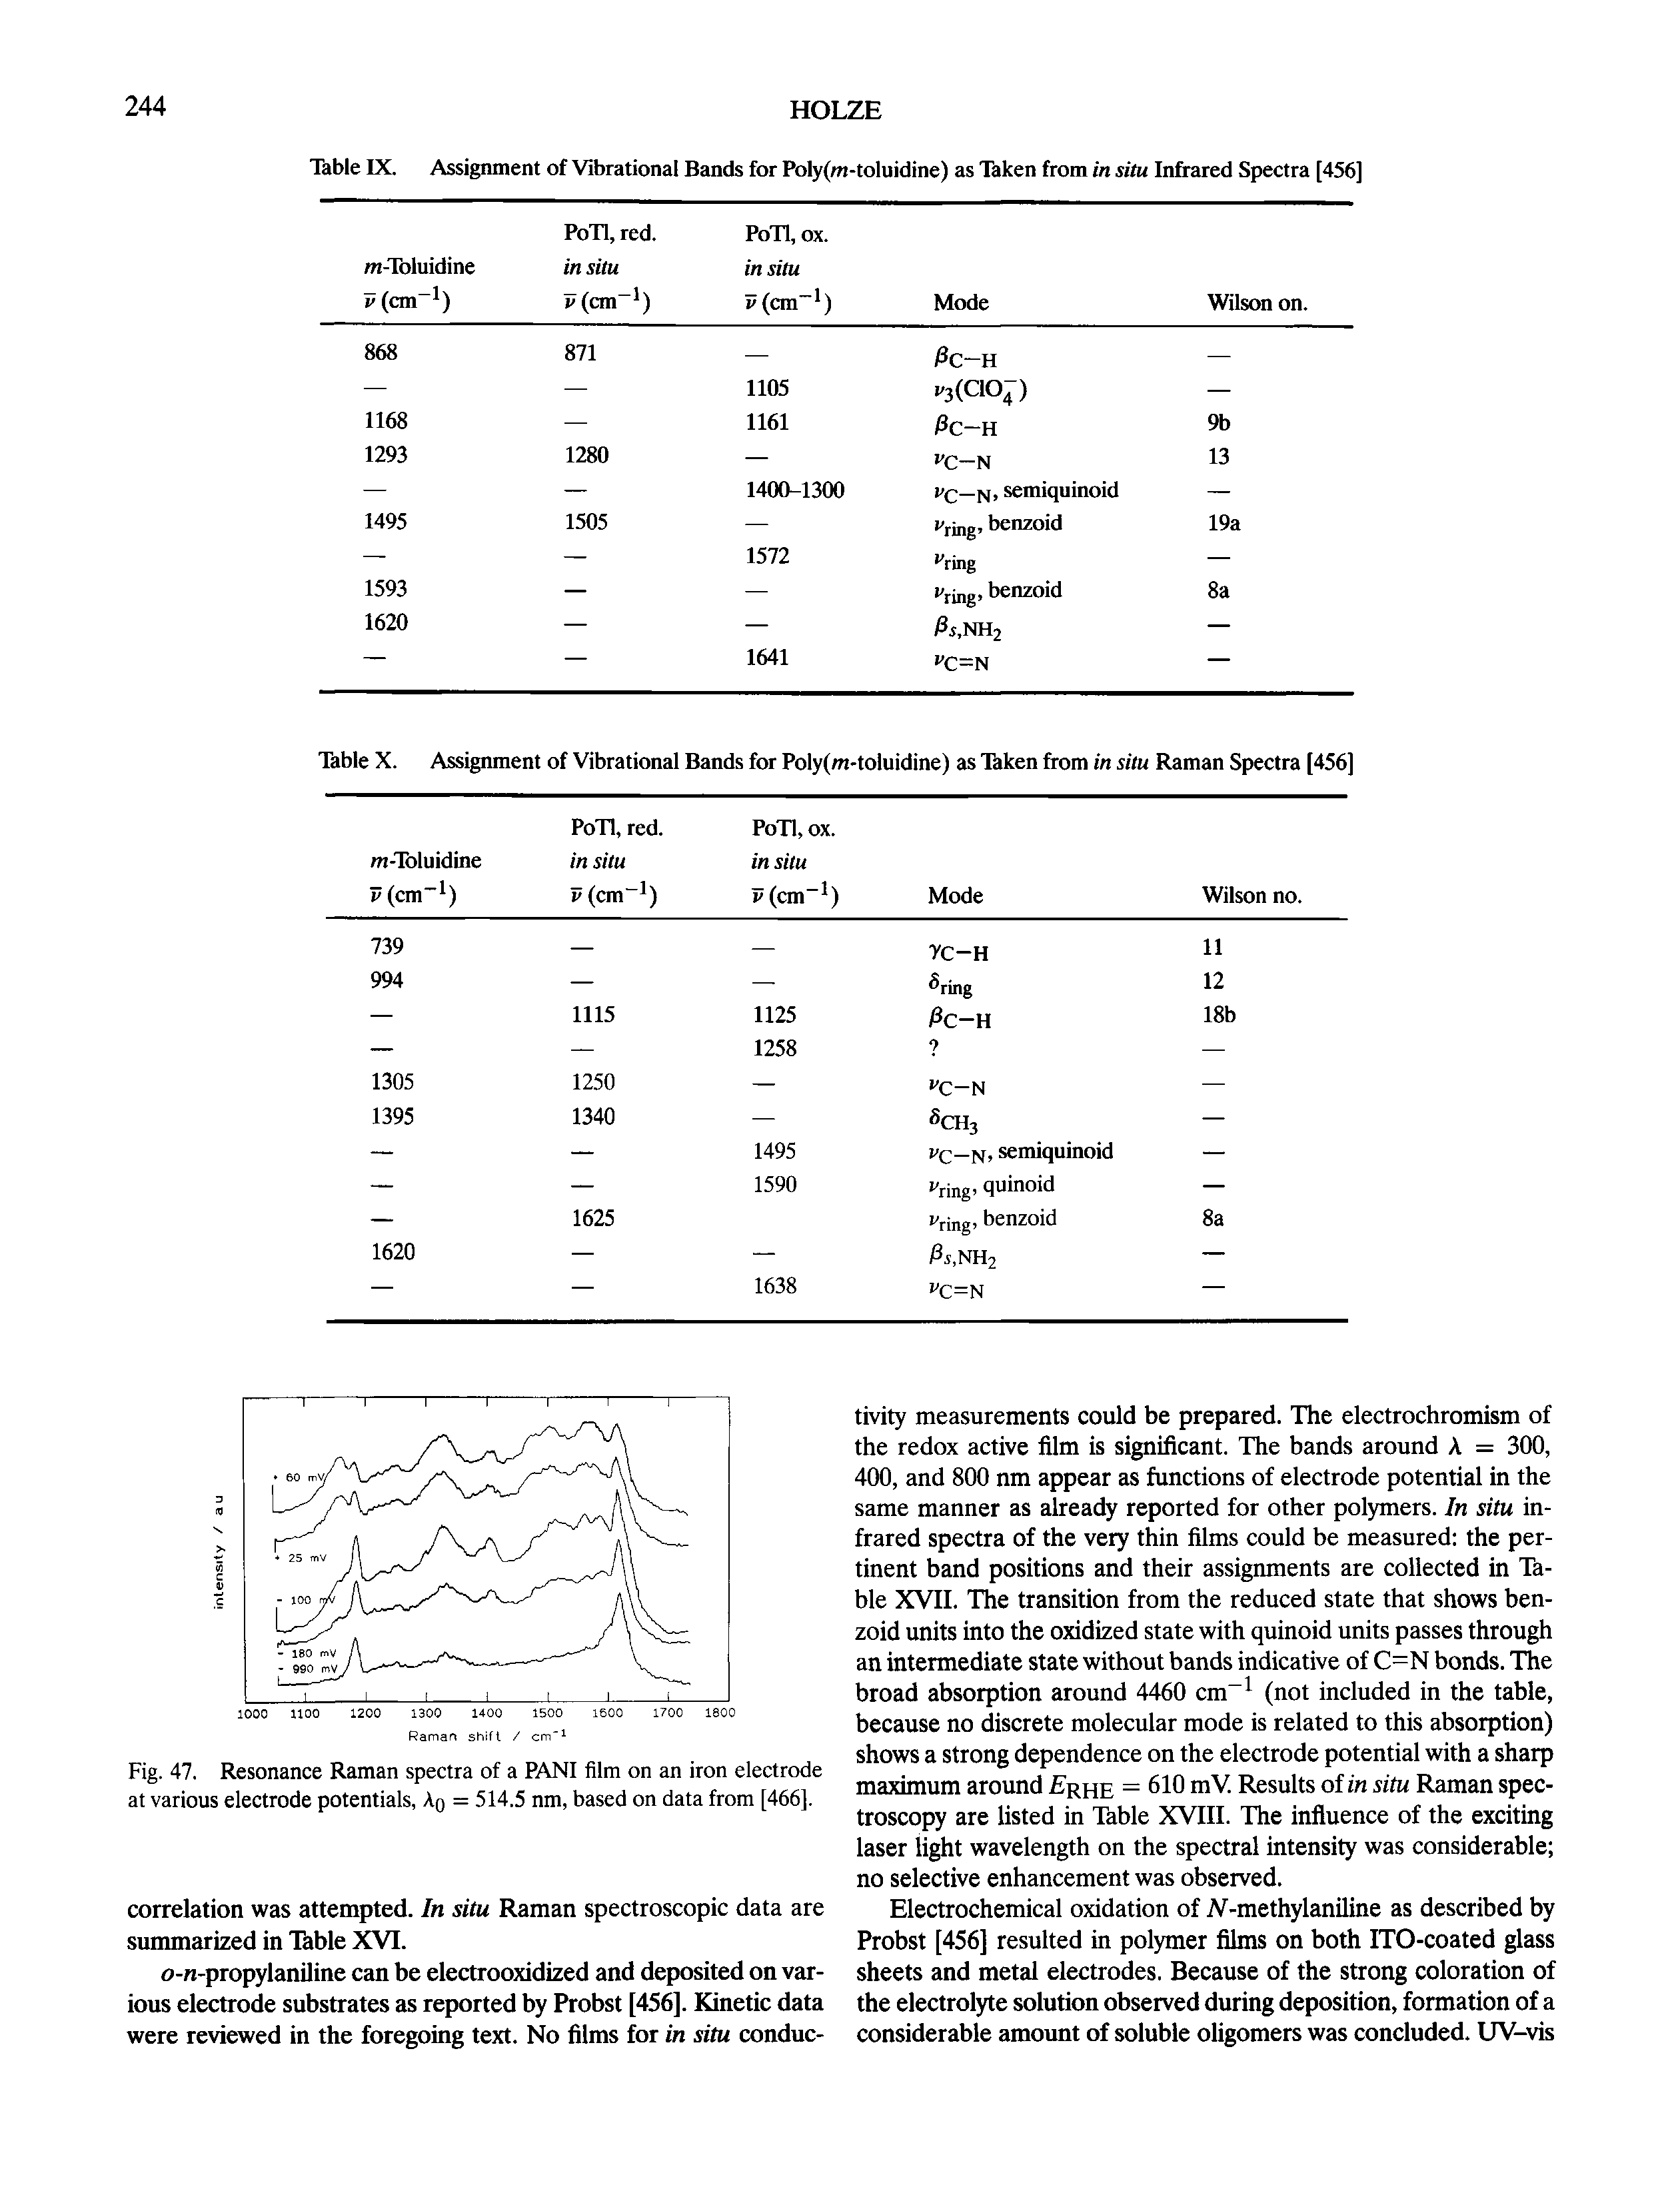 Table IX. Assignment of Vibrational Bands for Poly(m-toluidine) as Taken from in situ Infirared Spectra [456]...